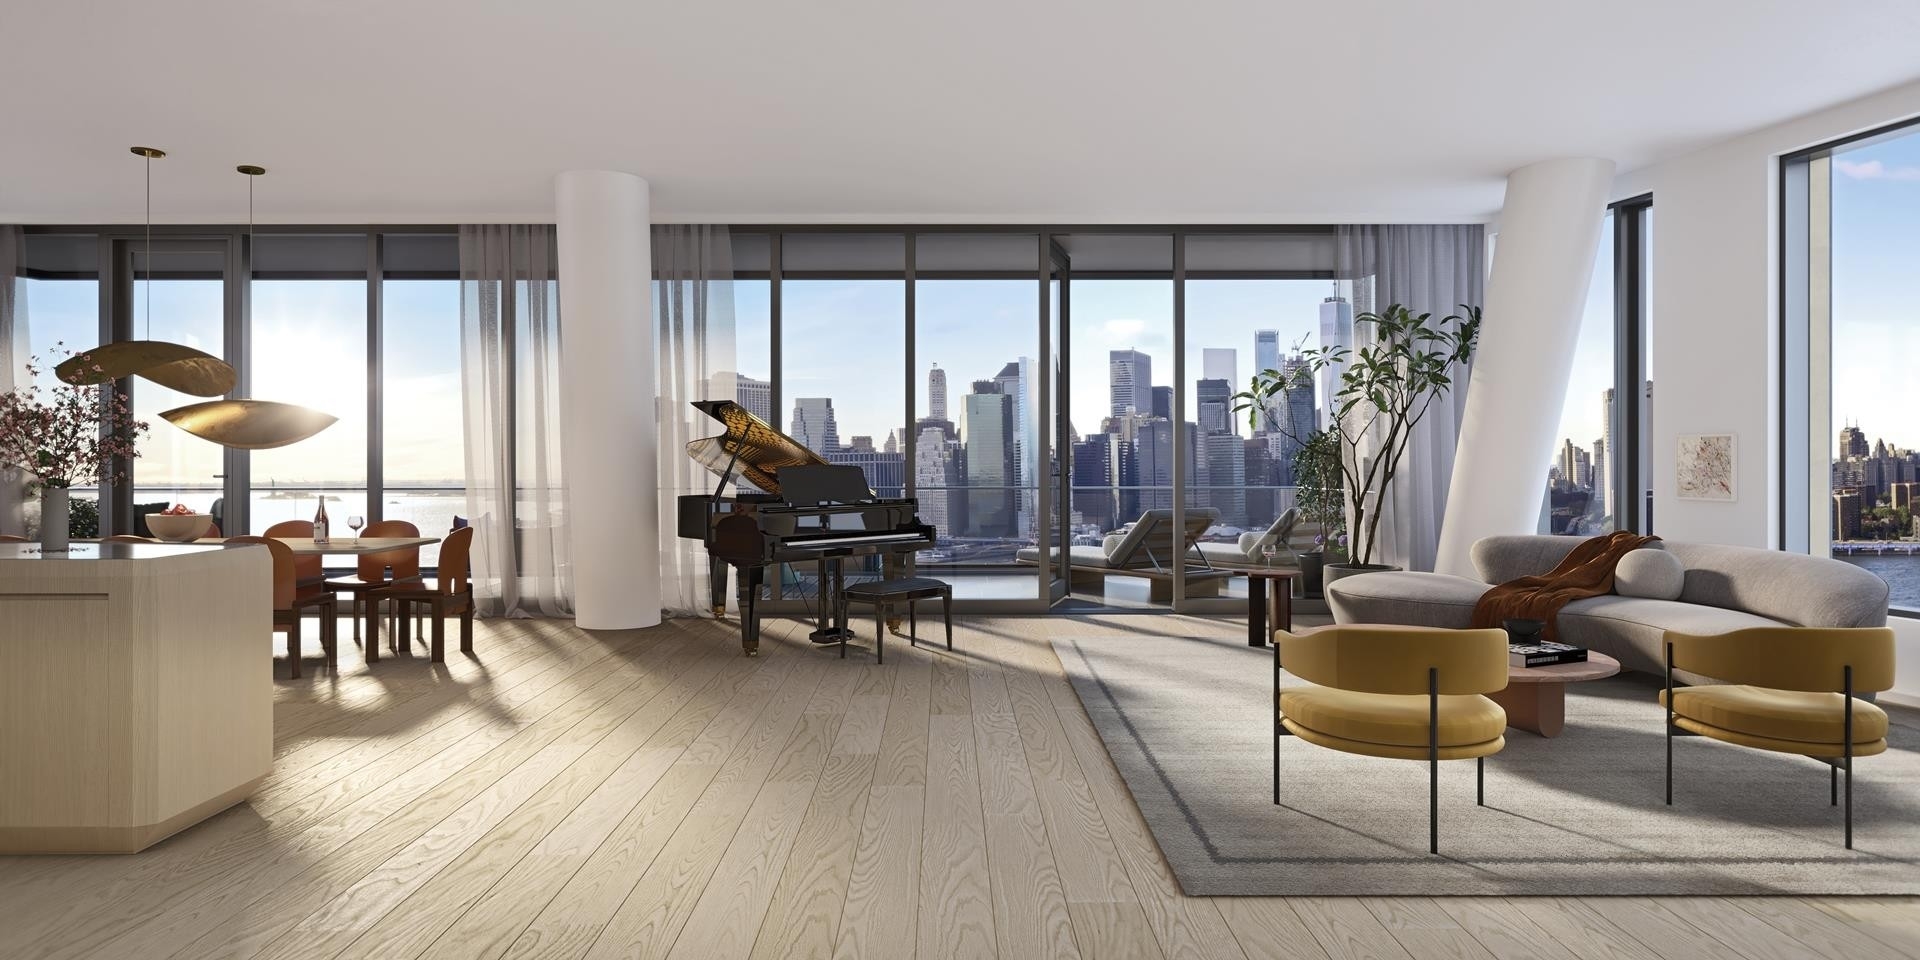 2. Condominiums for Sale at Olympia Dumbo, 30 FRONT ST, 10B Brooklyn, New York 11201